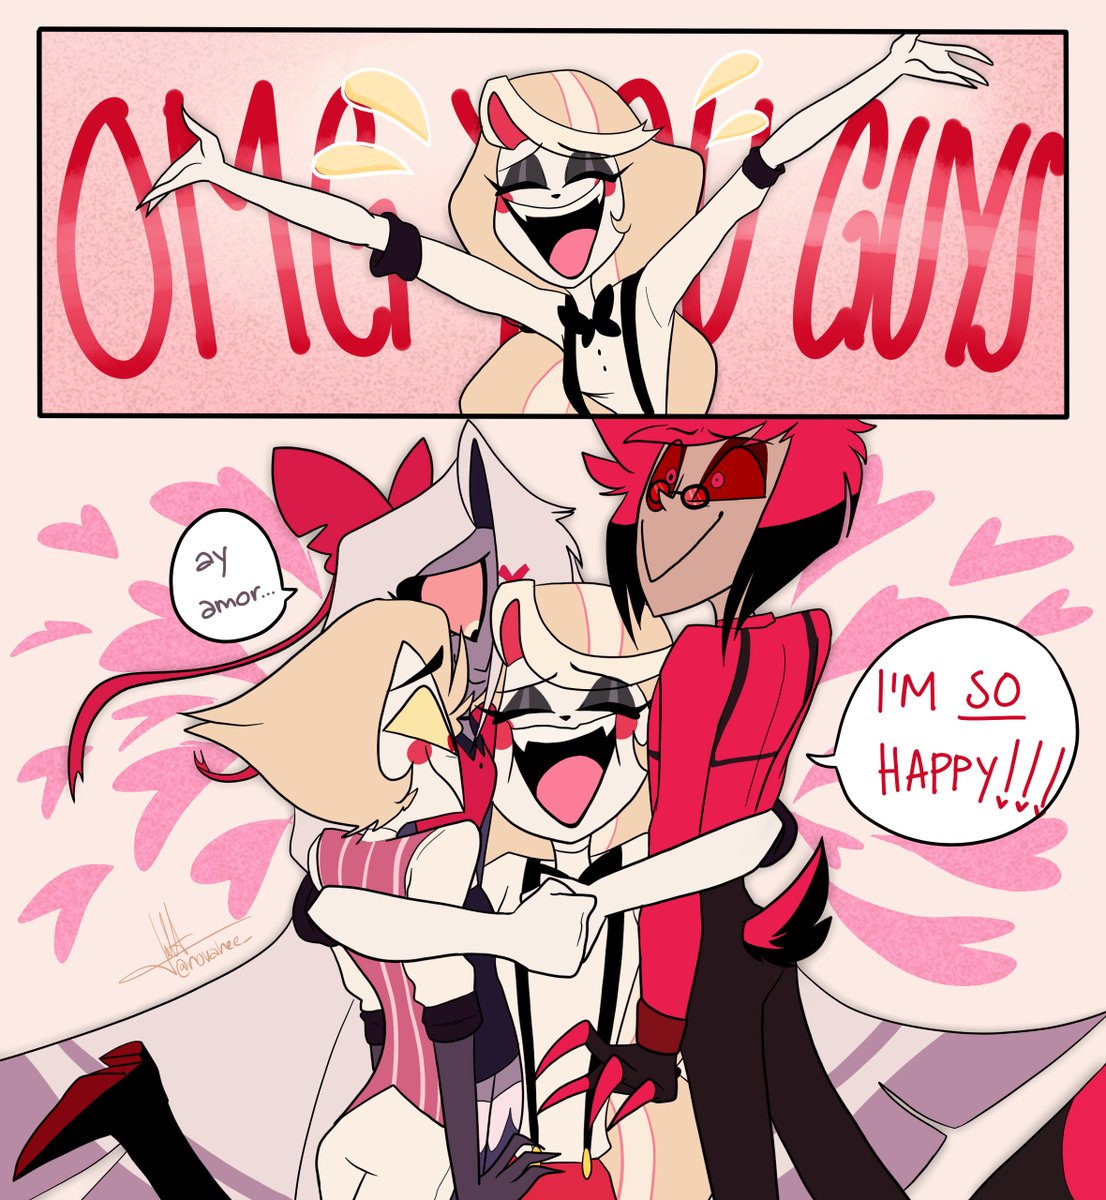 if hell´s greatest dad is so good, why is there no hell´s greatest dad part 2? Now Vaggie has to deal with TWO fathers in law #HazbinHotel #chaggie #radioapple